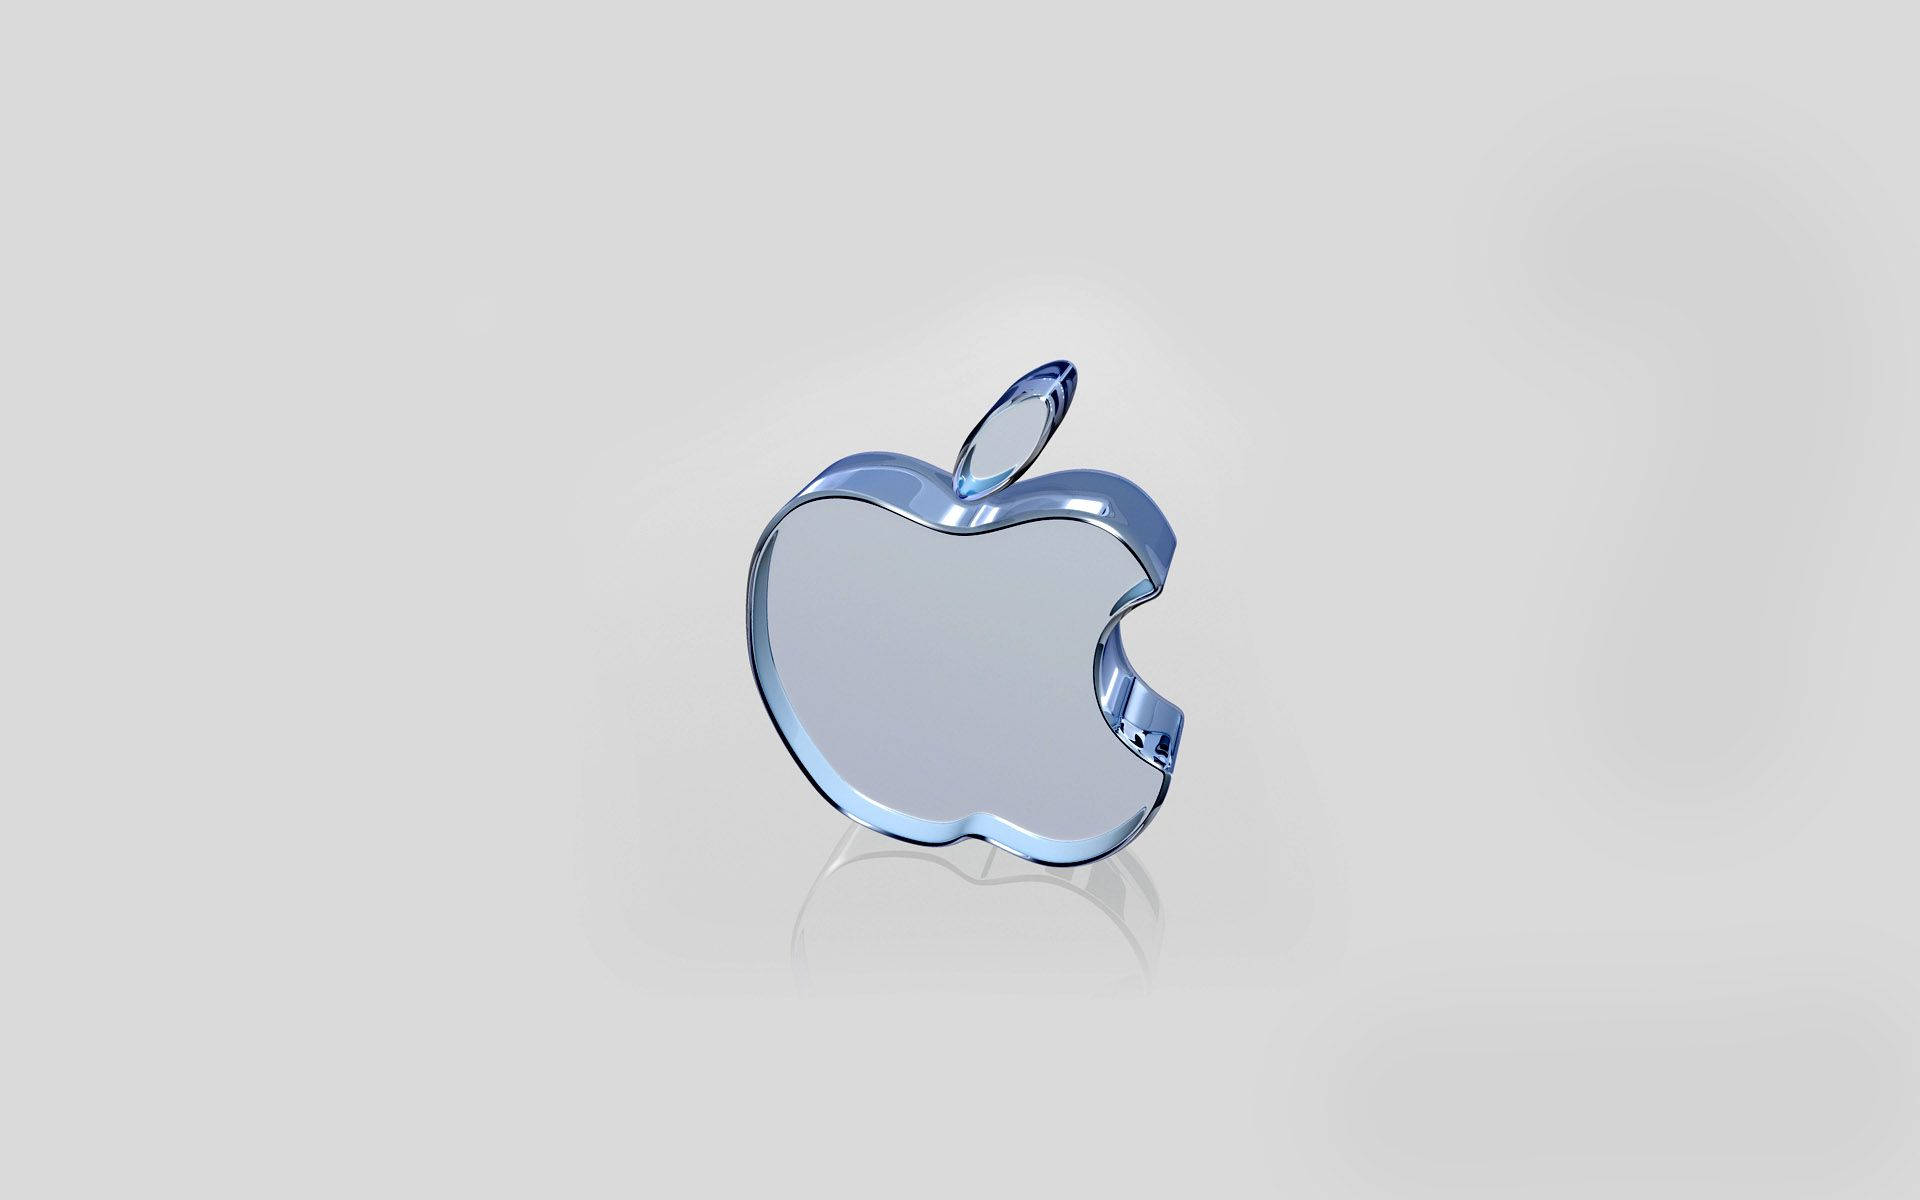 Reflections Of The Apple Logo Background